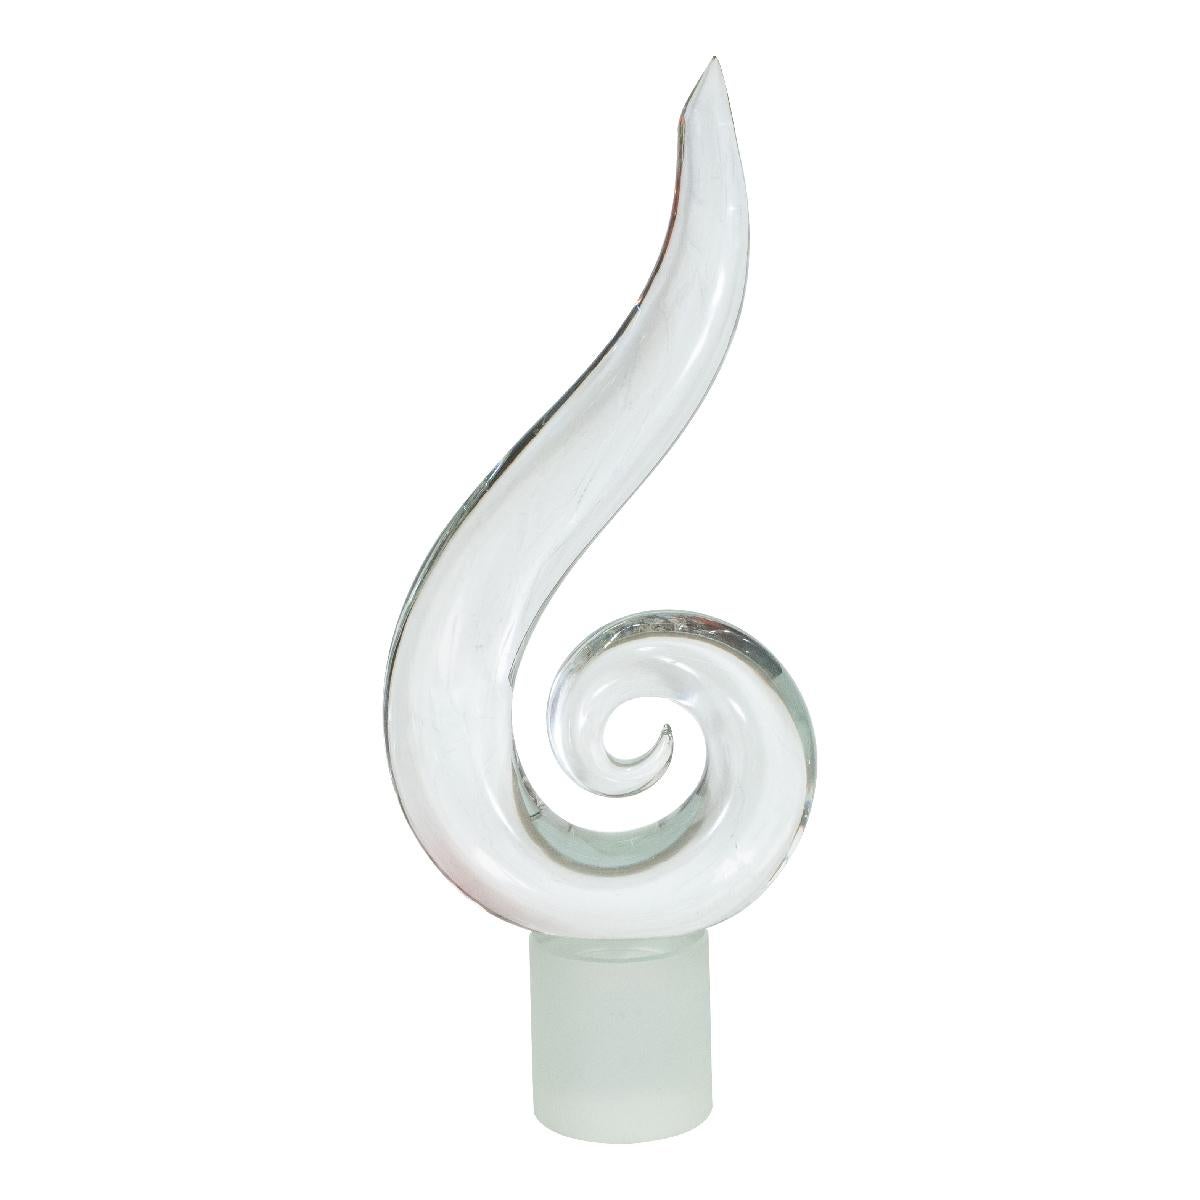 Swirled clear Murano glass sculpture on a frosted base by Elio Raffaeli for Seguso. Signed.